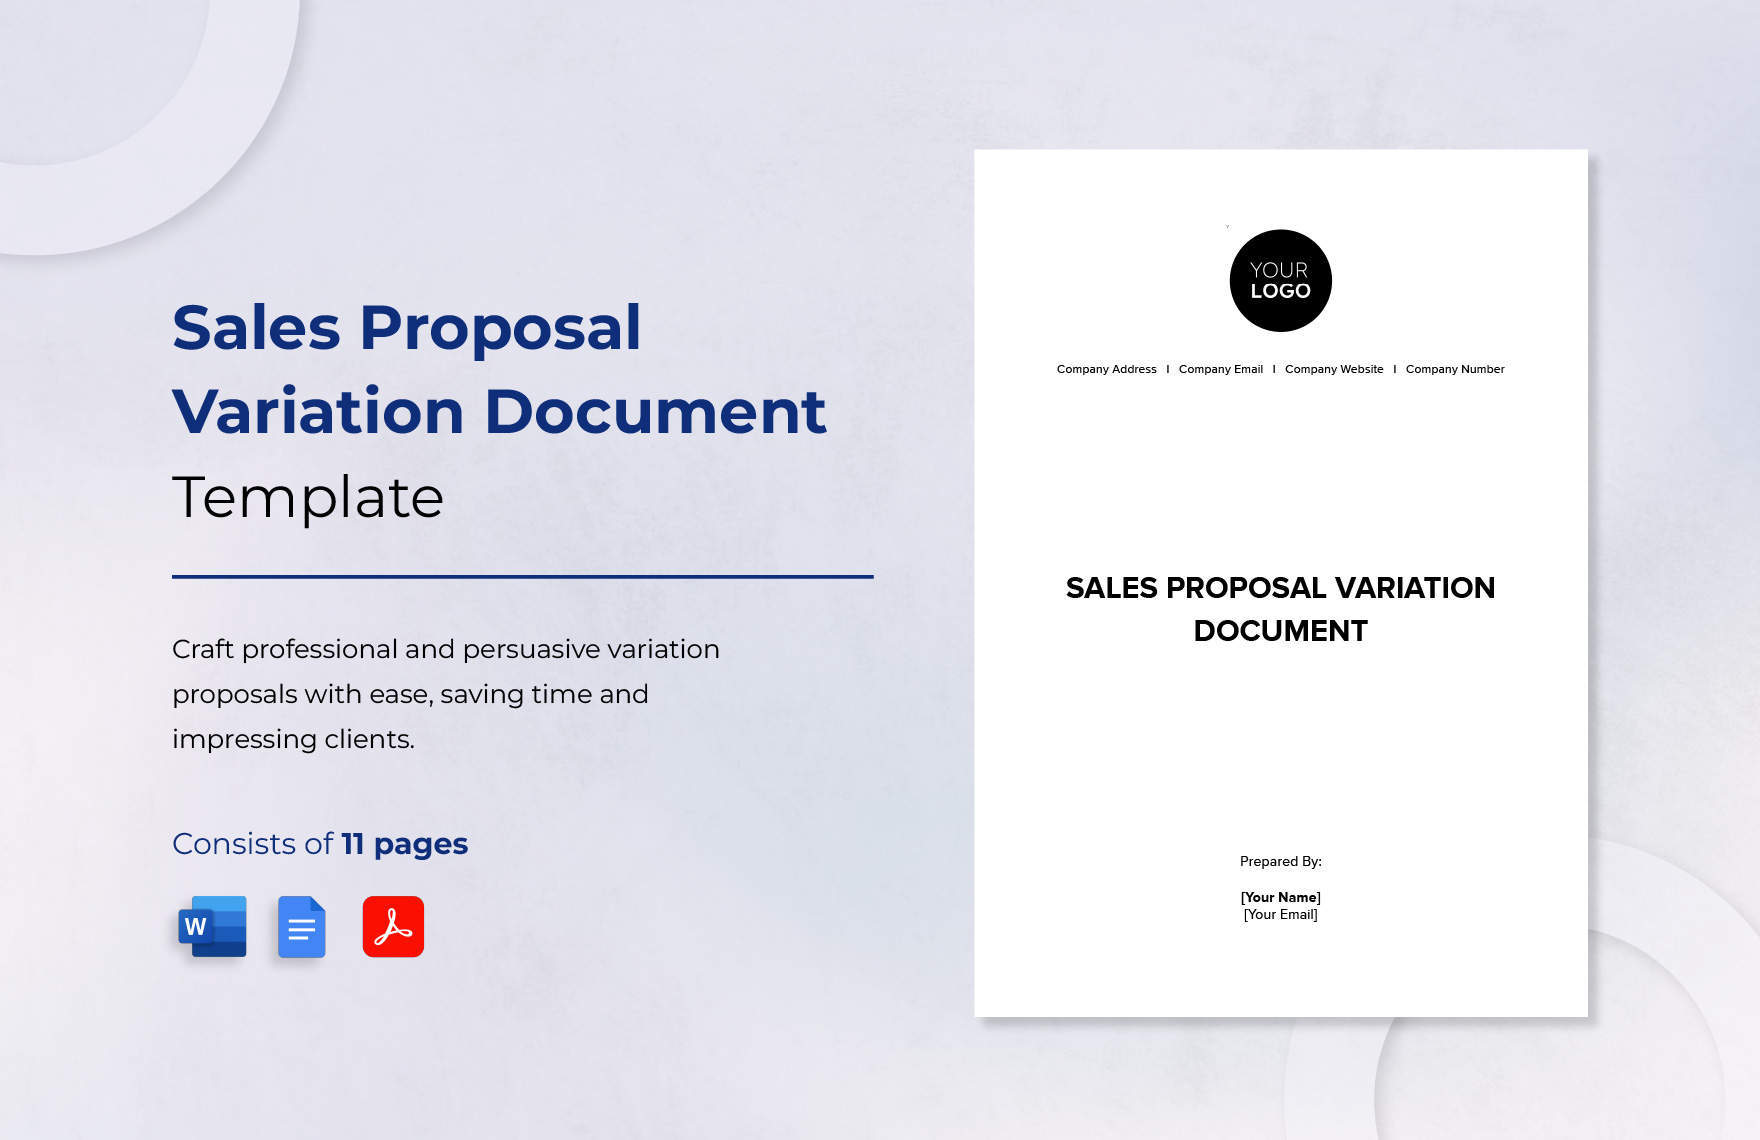 Sales Proposal Variation Document Template in Word, Google Docs, PDF